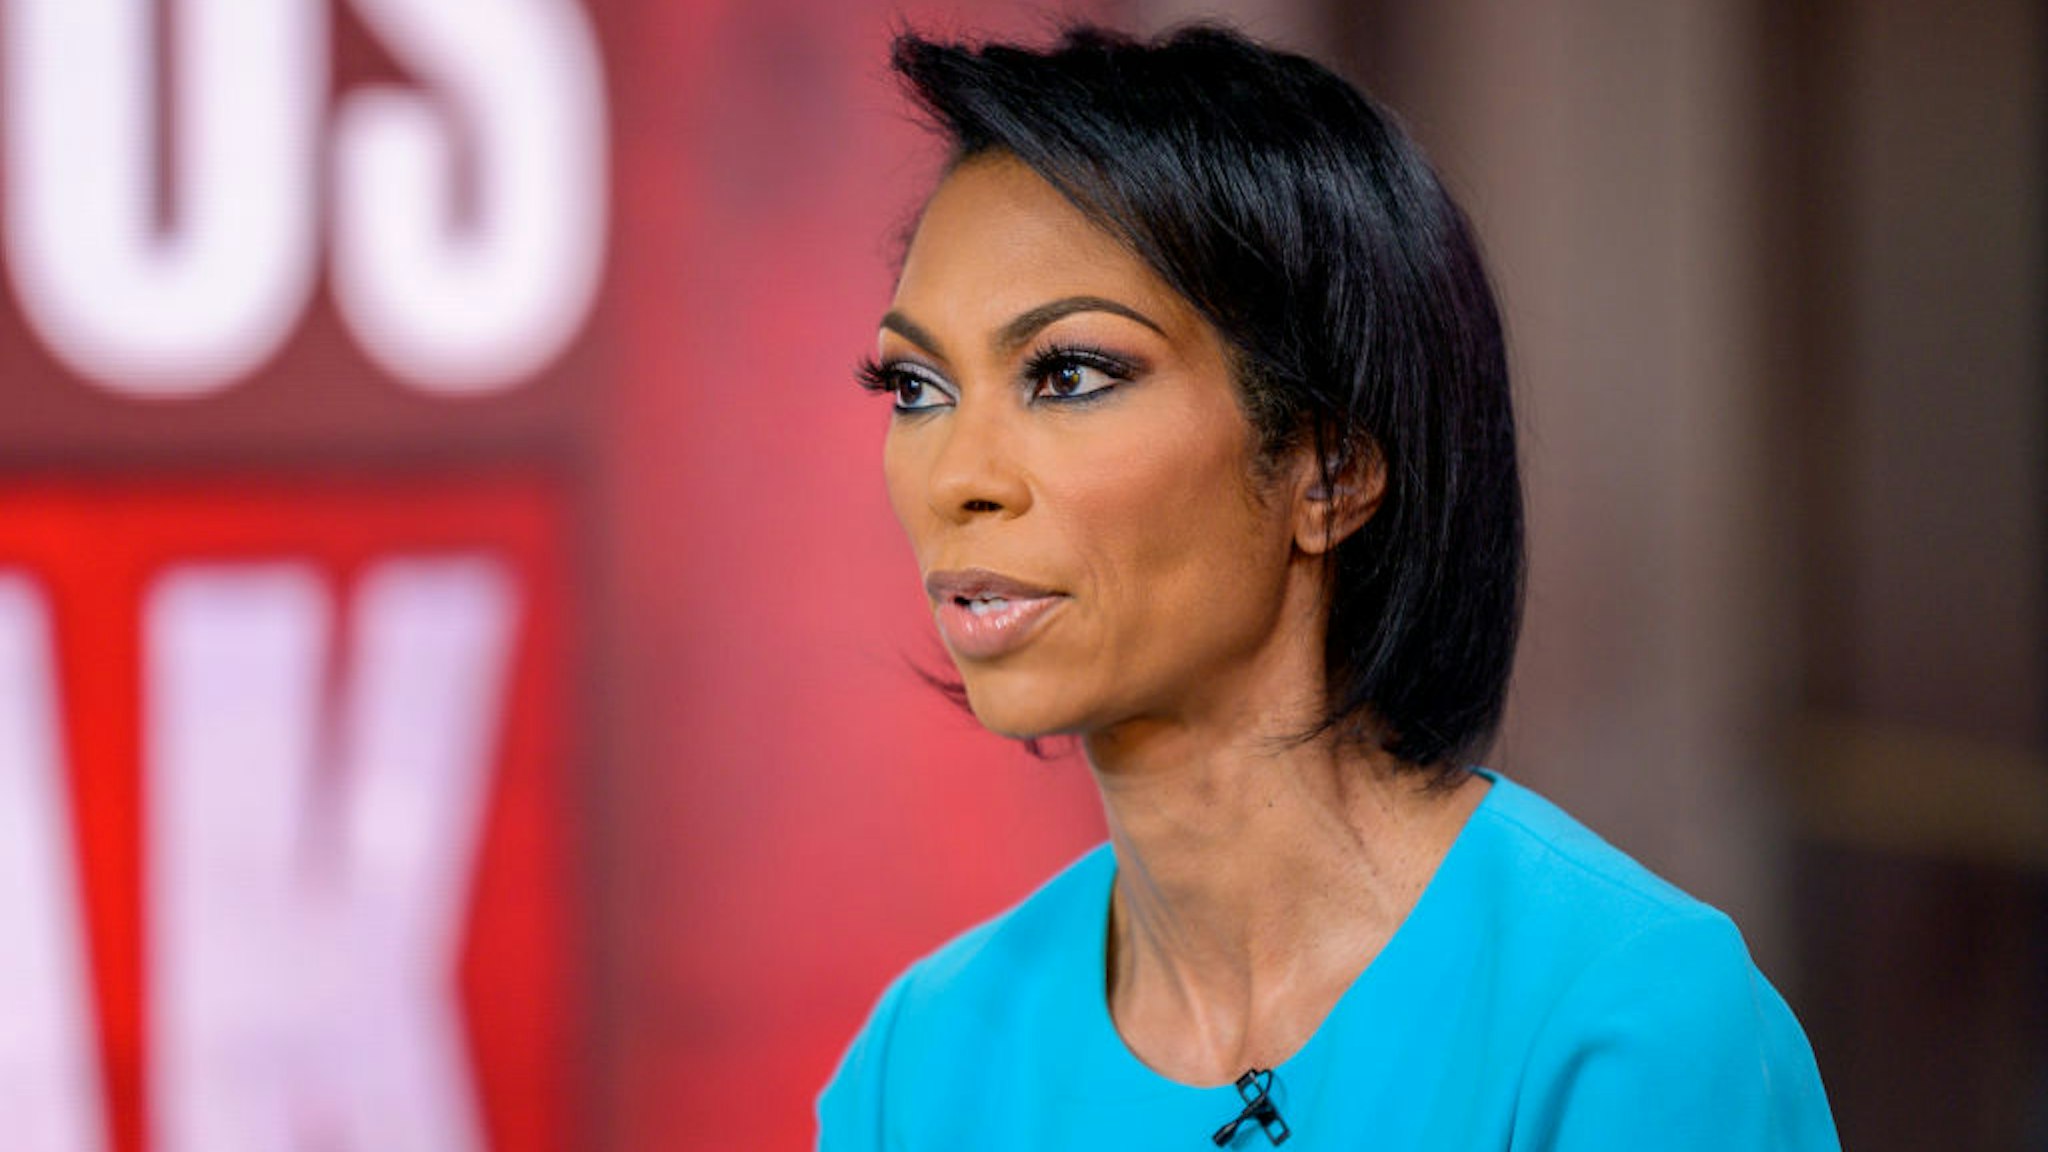 NEW YORK, NEW YORK - MARCH 09: Harris Faulkner as Dr. Oz visits "Outnumbered Overtime" at Fox News Channel Studios on March 09, 2020 in New York City. (Photo by Roy Rochlin/Getty Images)